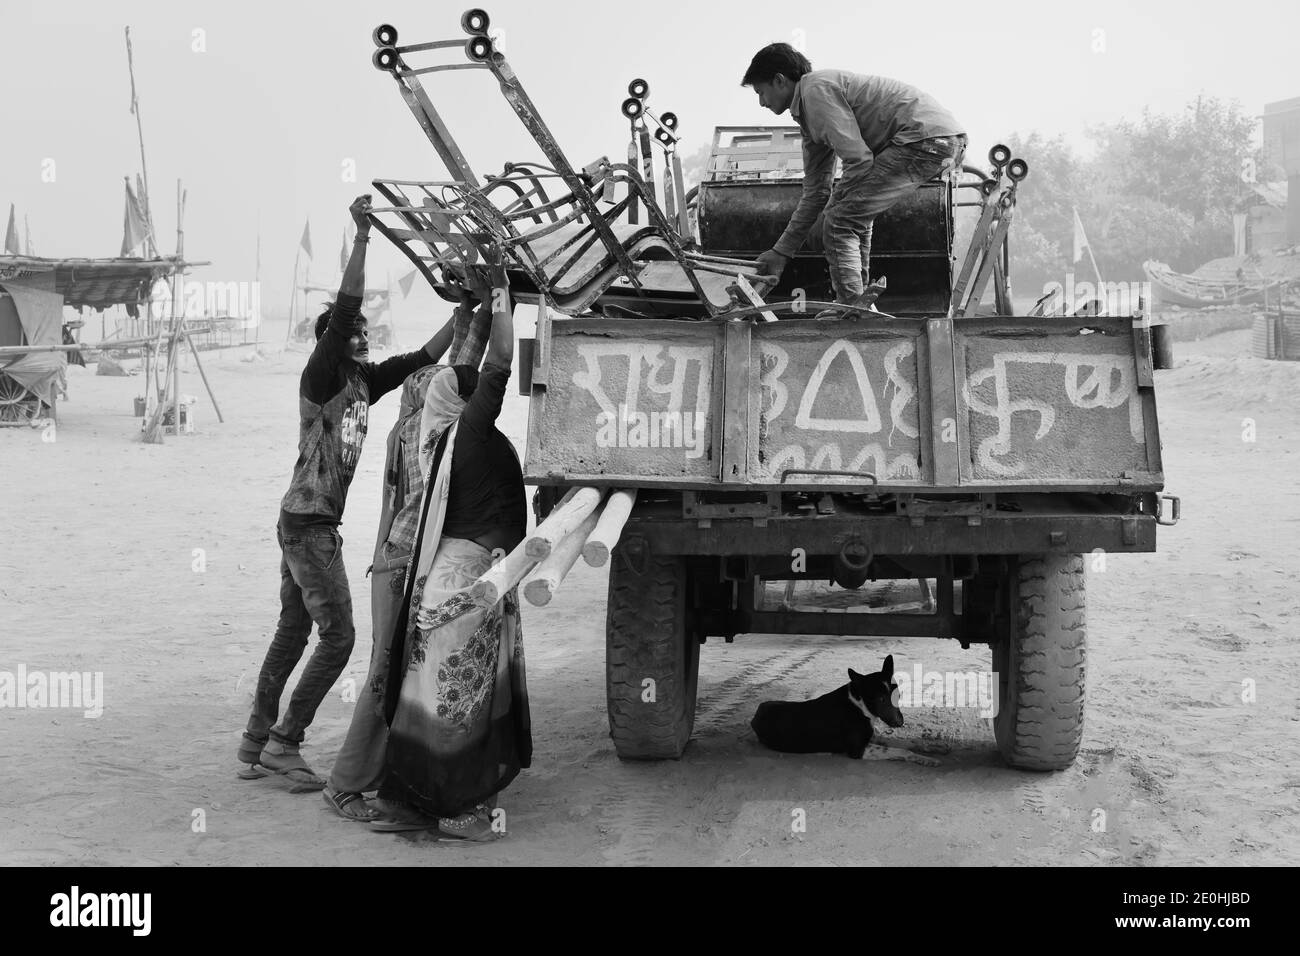 Two omen and man load dismantled chairs of big wheel onto waiting truck on hot summer day alongside river Yamuna in Vrindavan, Uttar Pradesh, India. Stock Photo